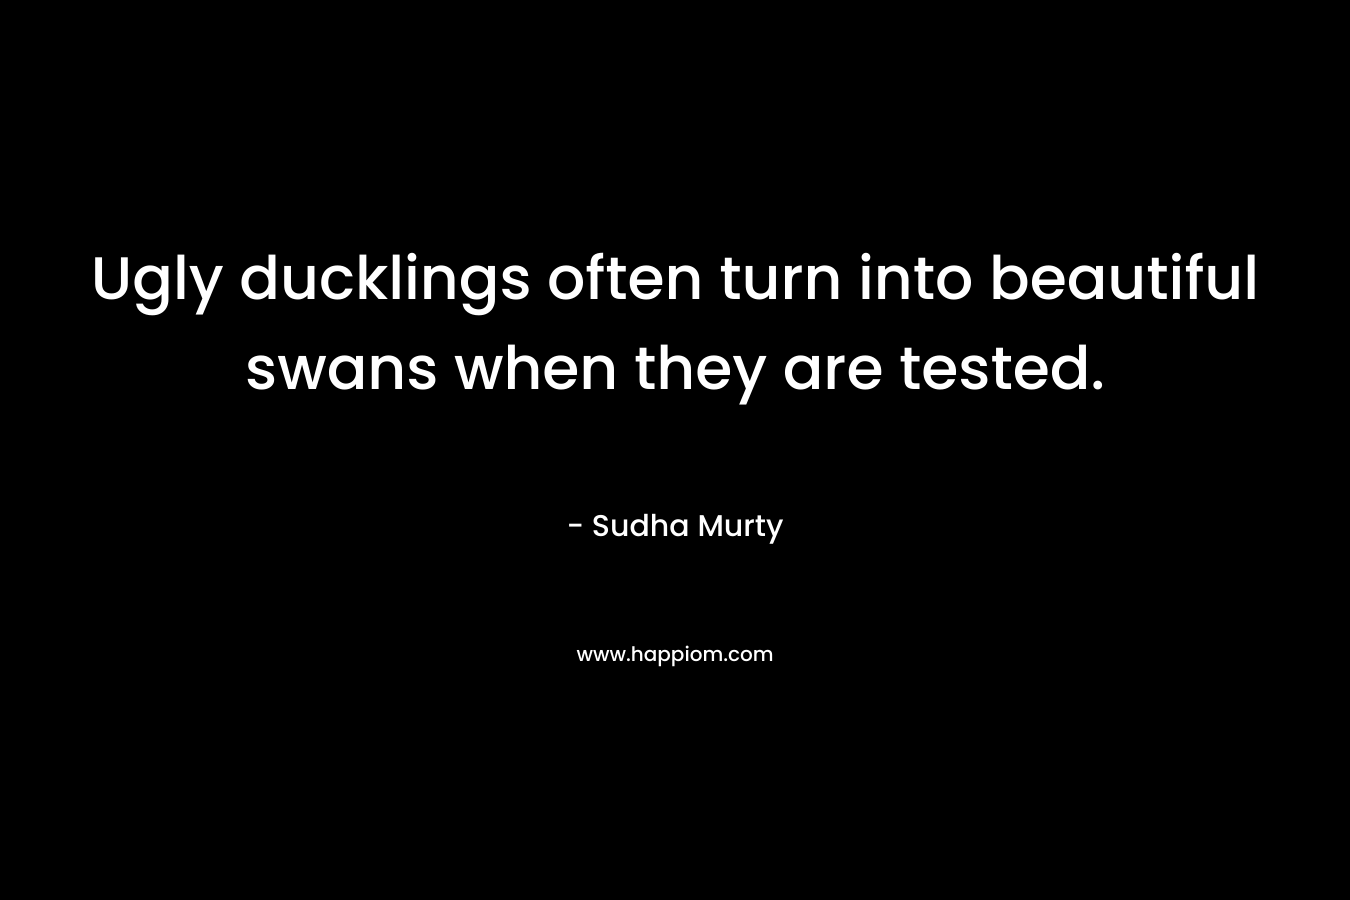 Ugly ducklings often turn into beautiful swans when they are tested.